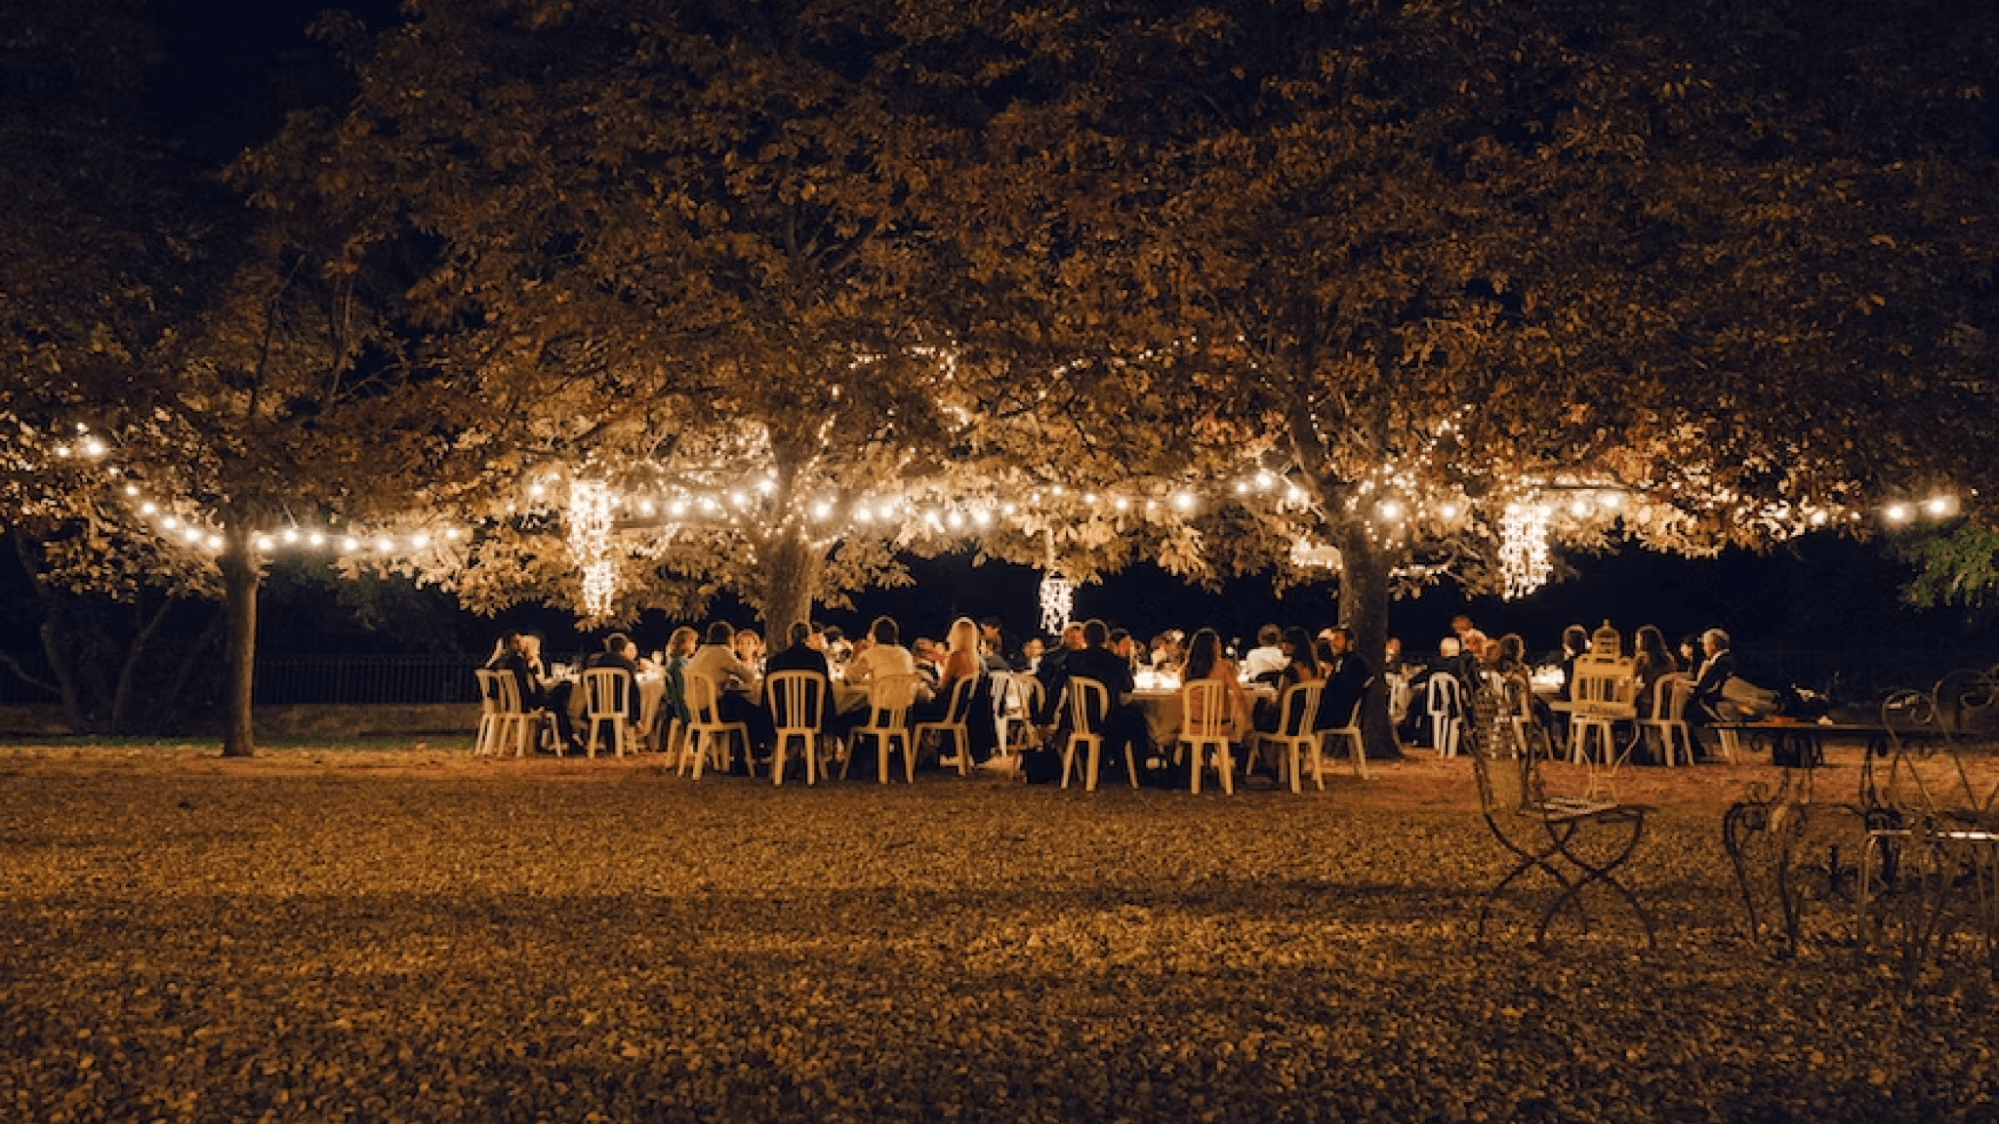 People sitting at table underneath a tree at night